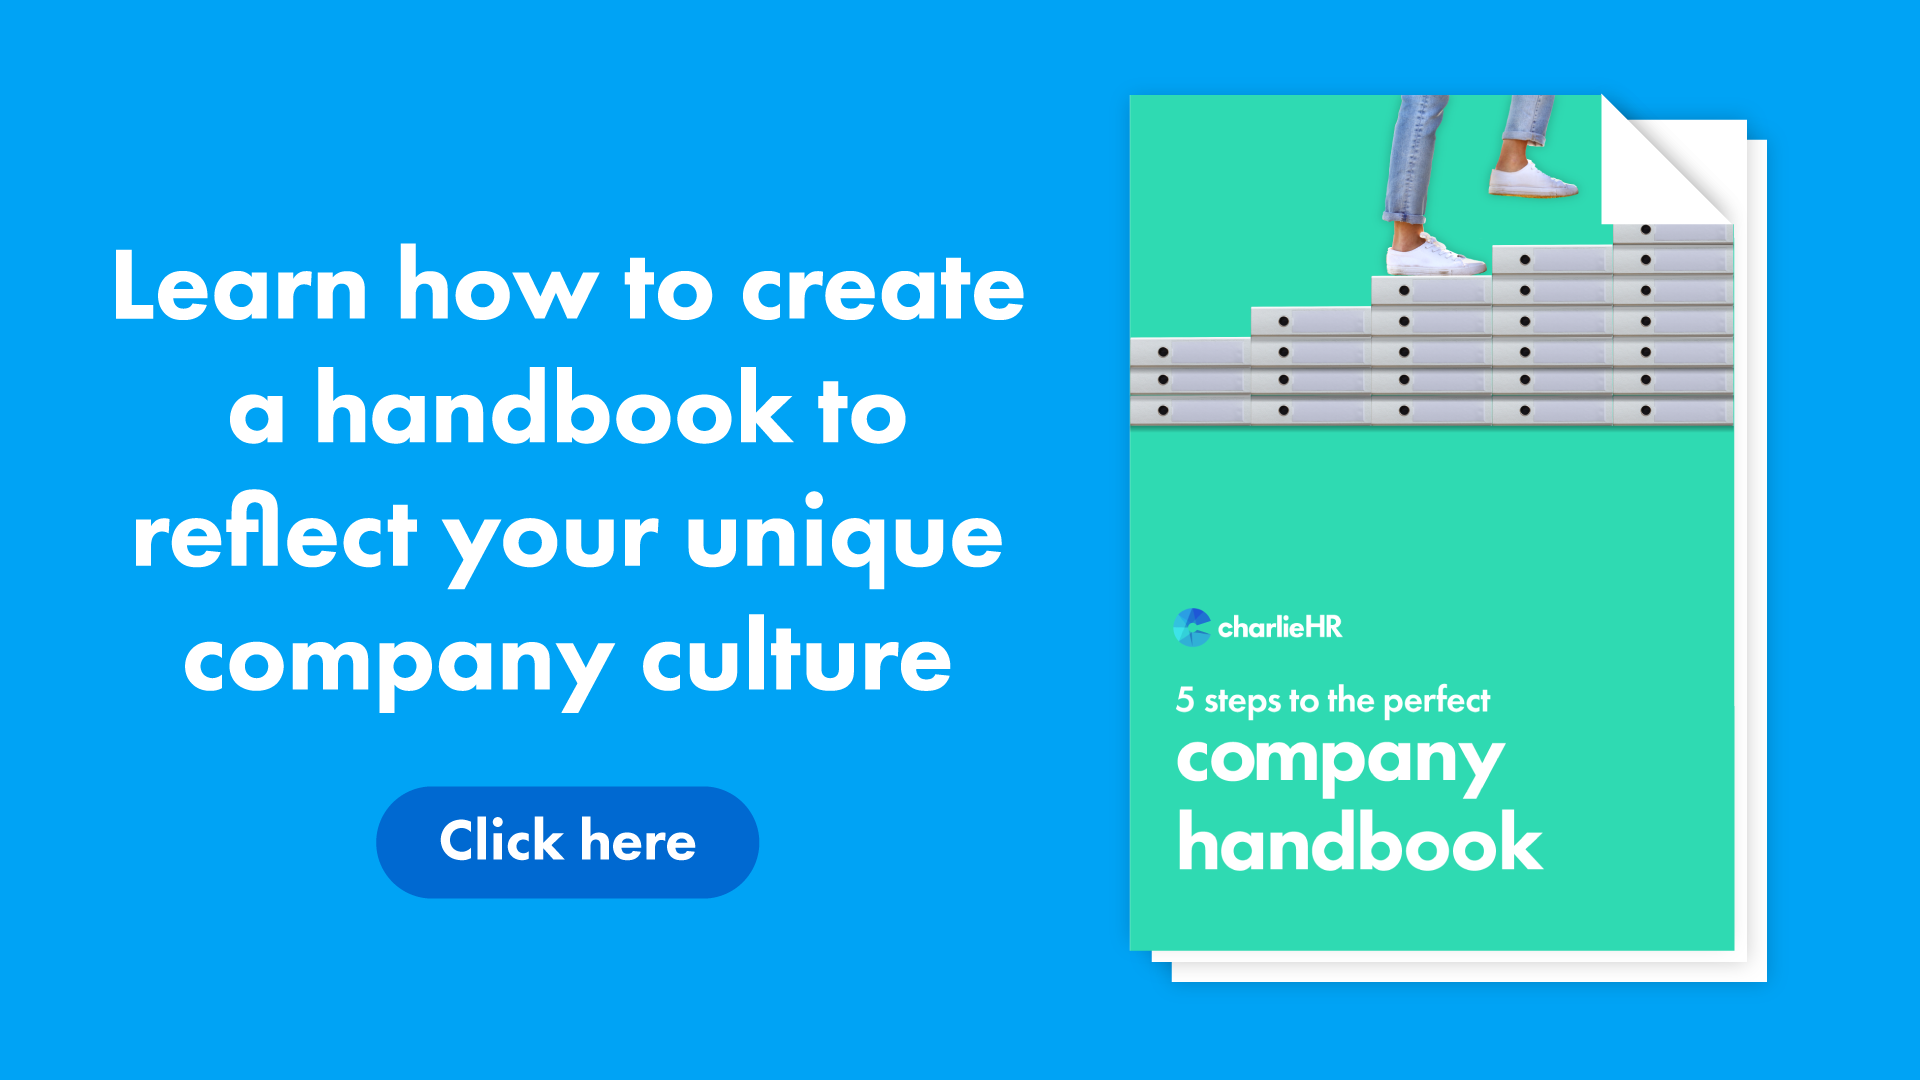 Click here to learn how to create a handbook for your business